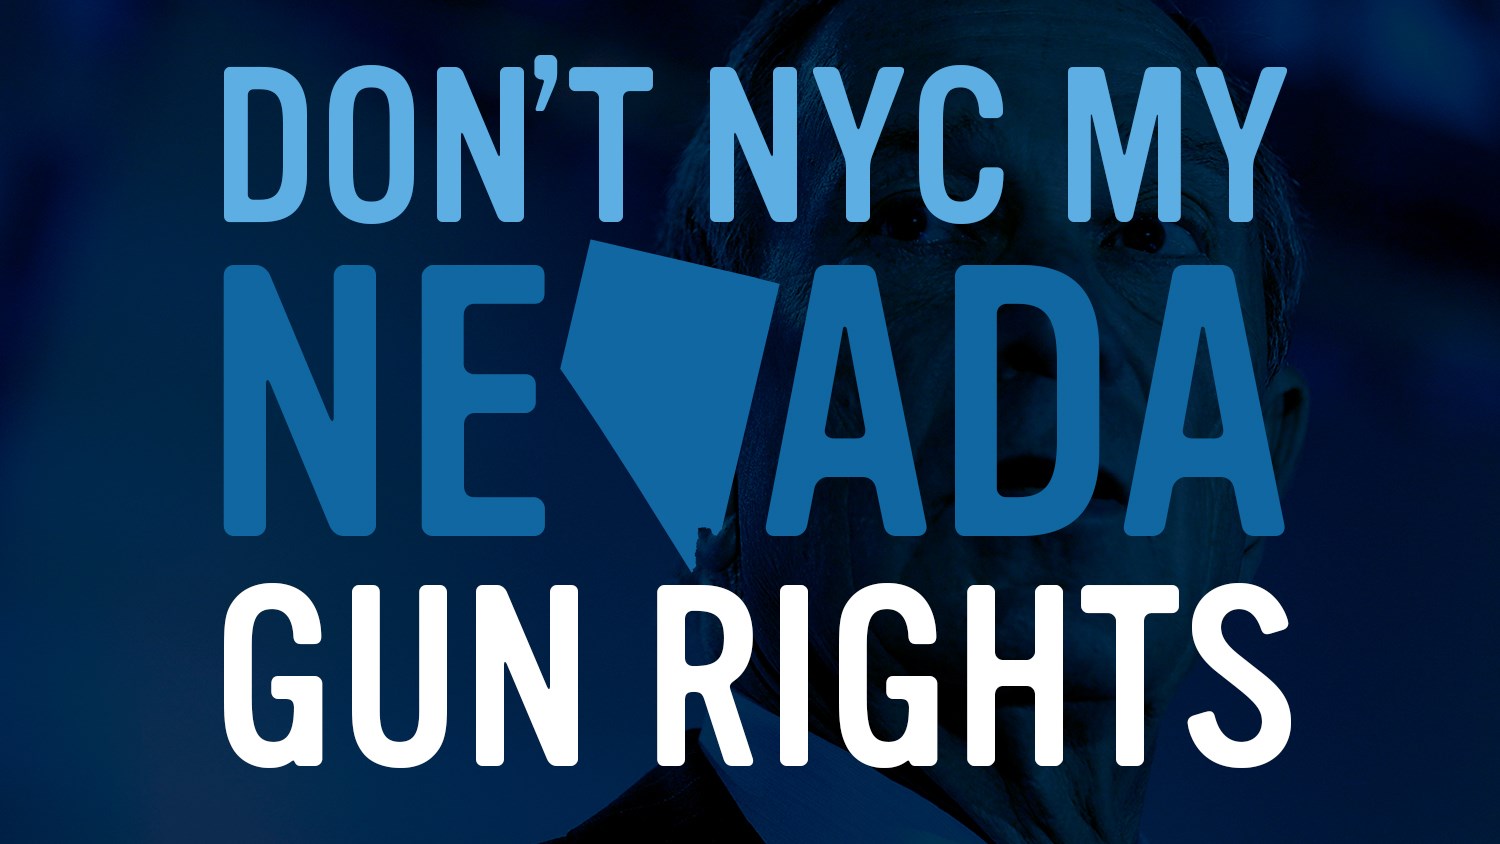 Are You Prepared to Let Former NYC Mayor Michael Bloomberg Take Your Nevada Gun Rights?